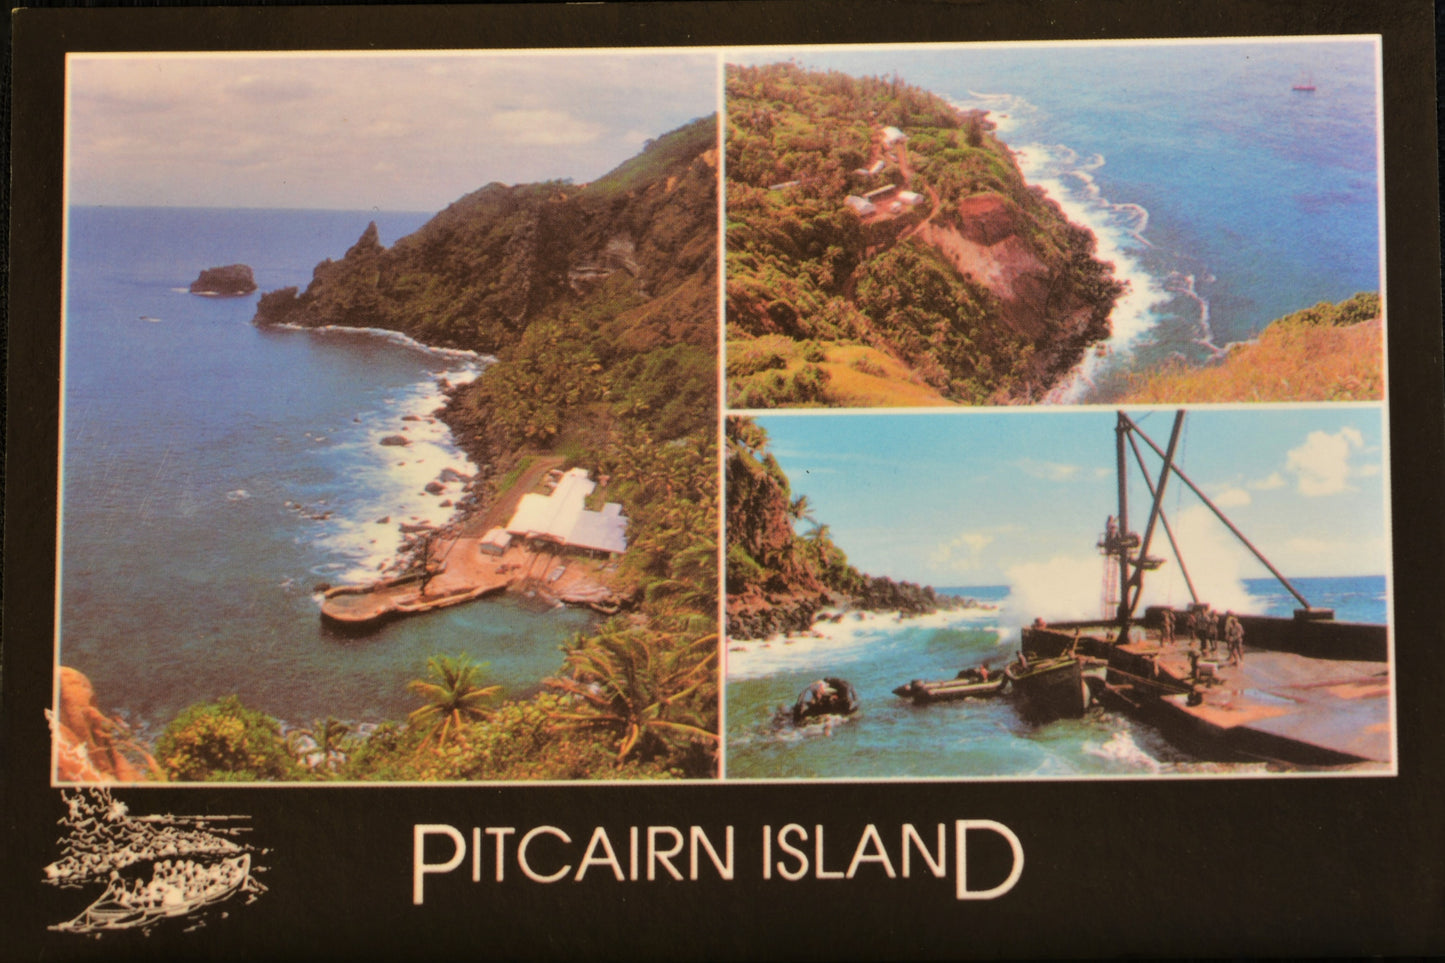 Pitcairn Island Postcard - Bounty Bay and the Landing Stamped